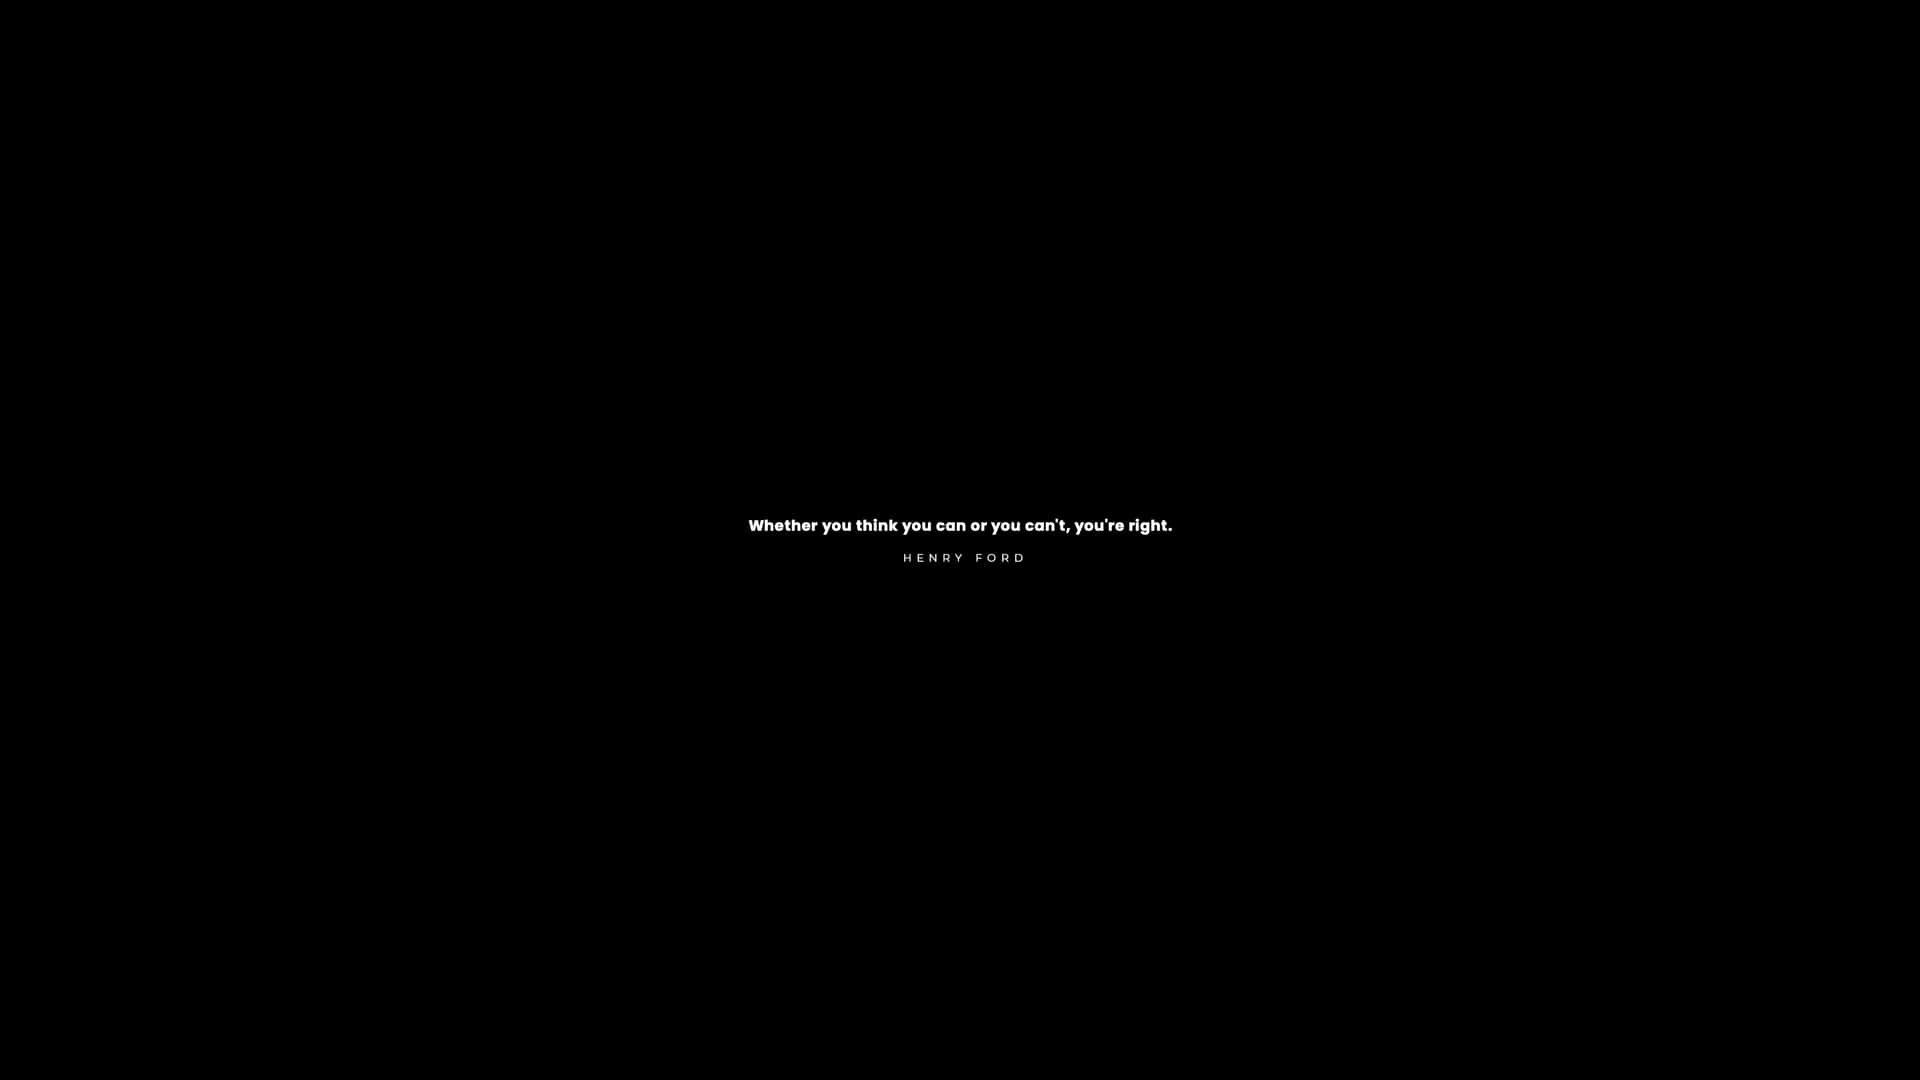 A Black Background With A White Text Wallpaper